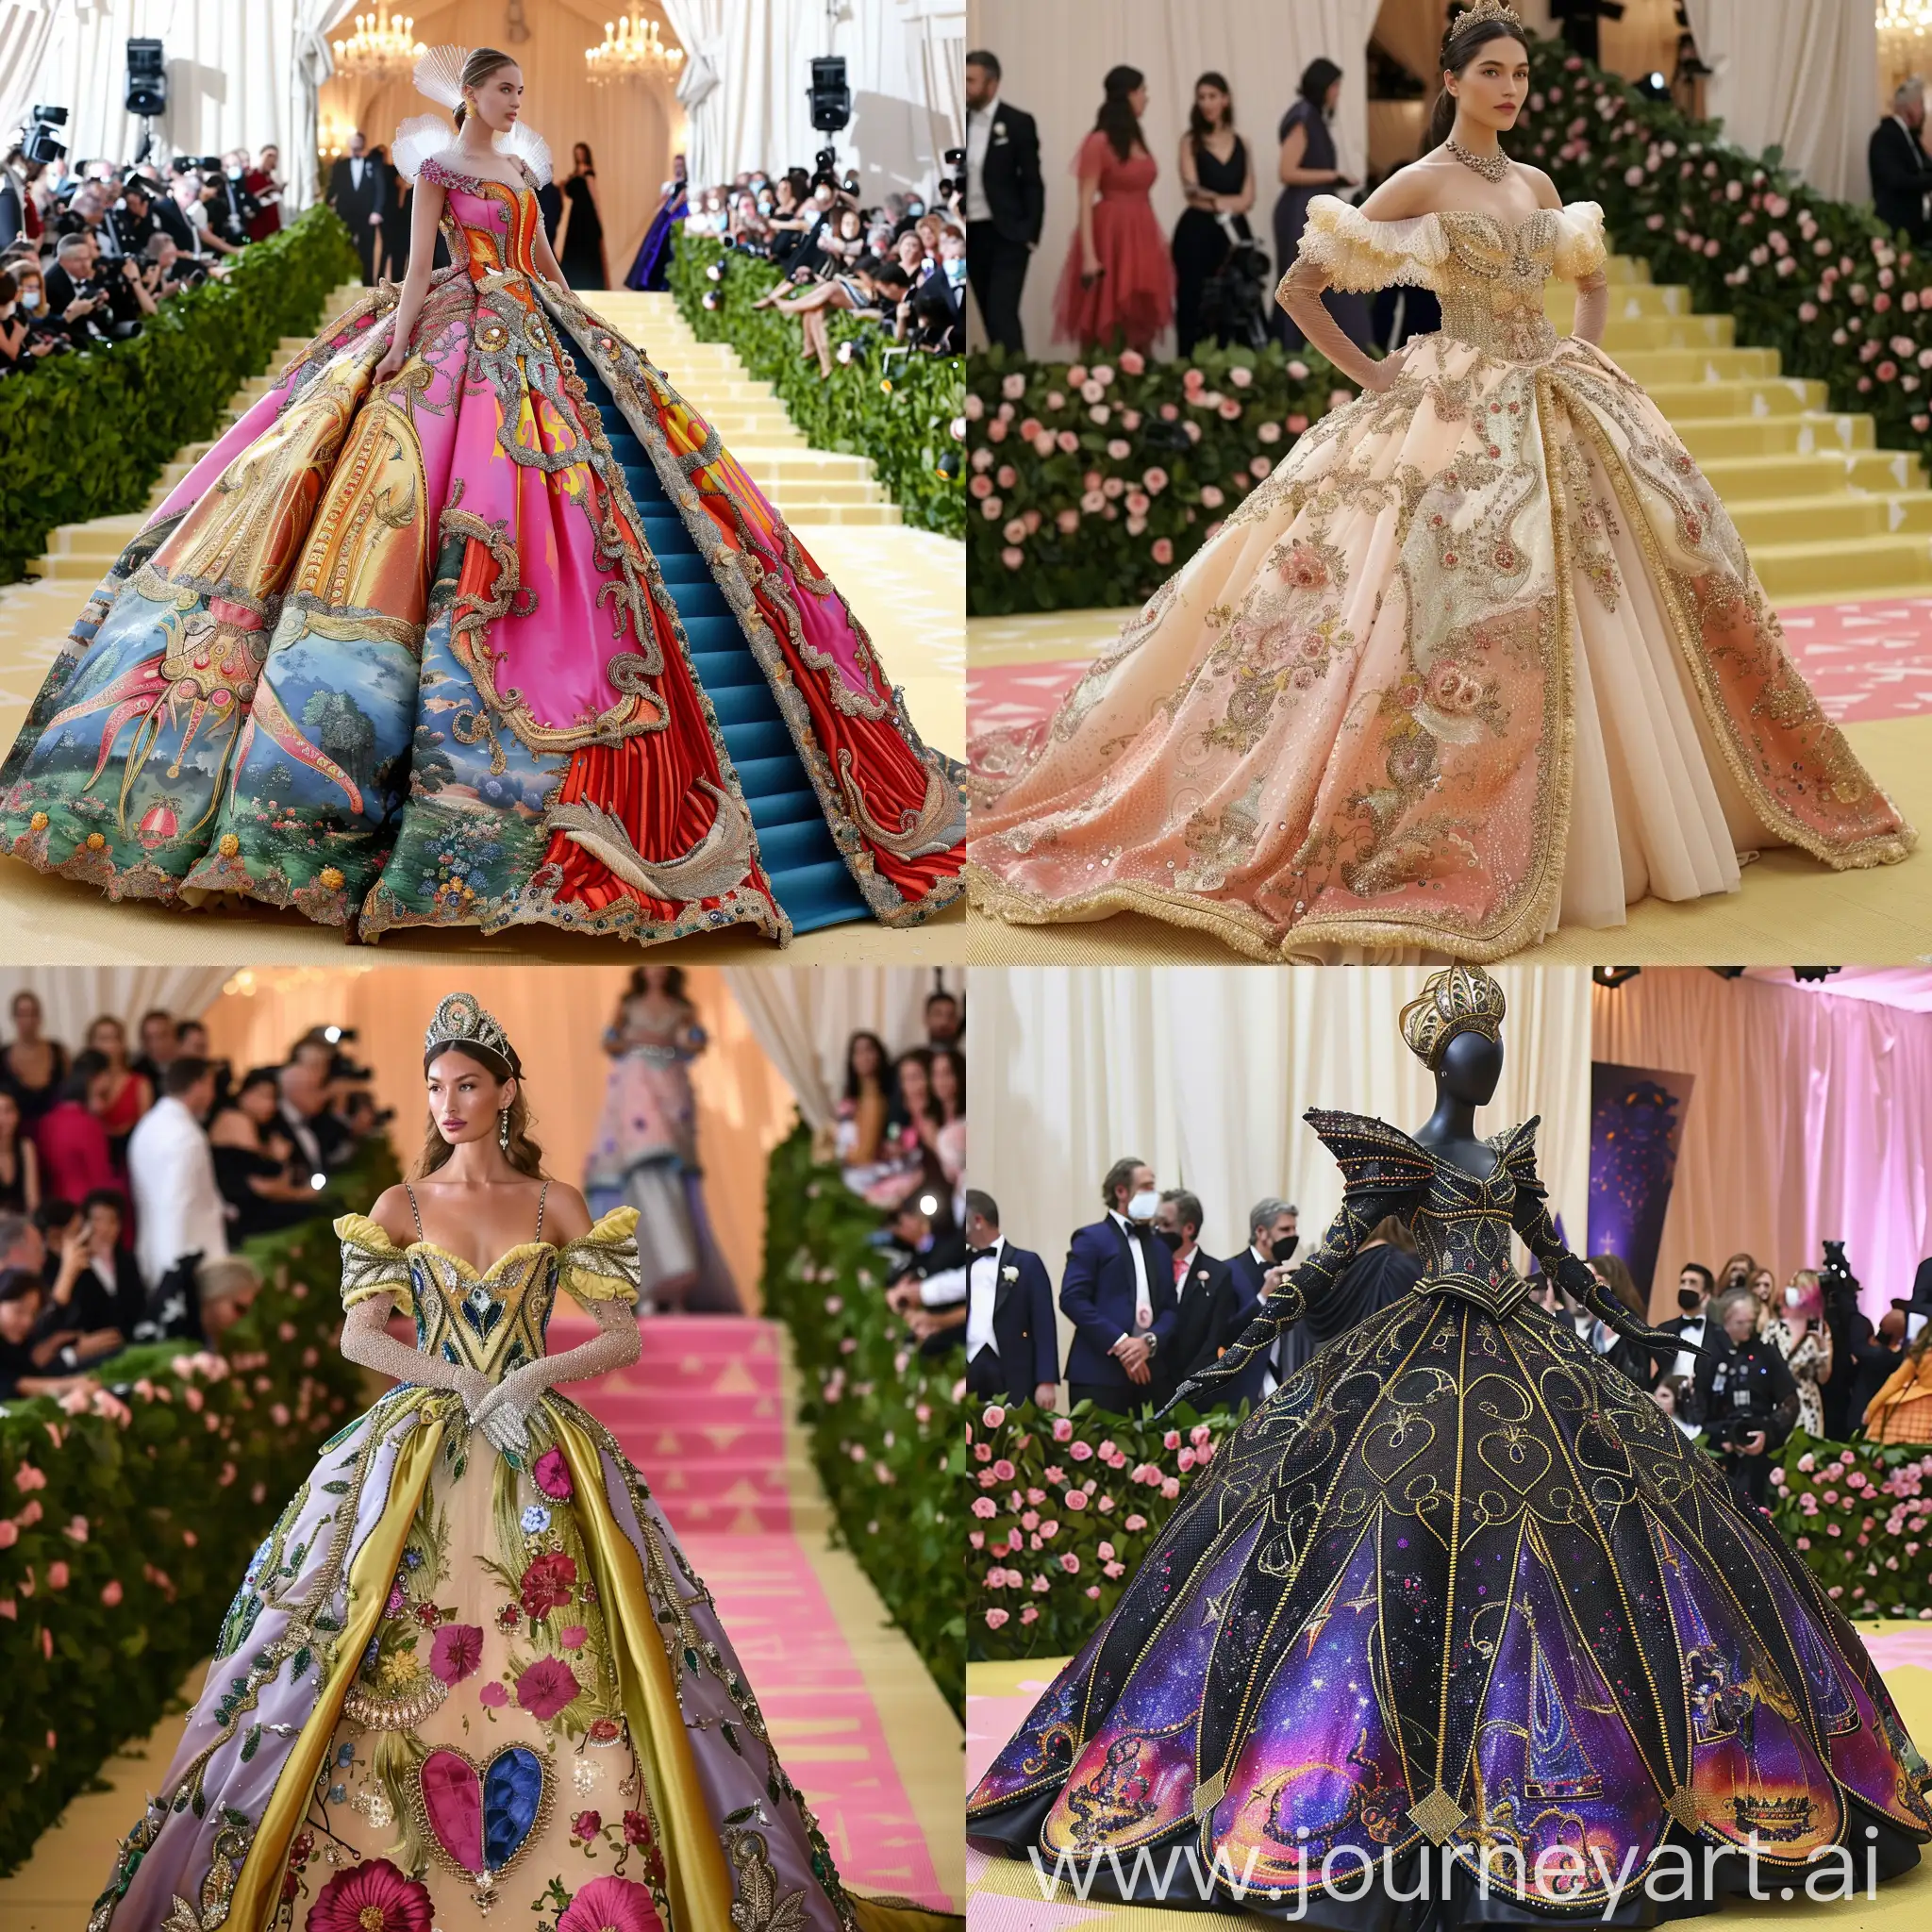 Dress design for this year's Met Gala with Sleeping Beauty theme